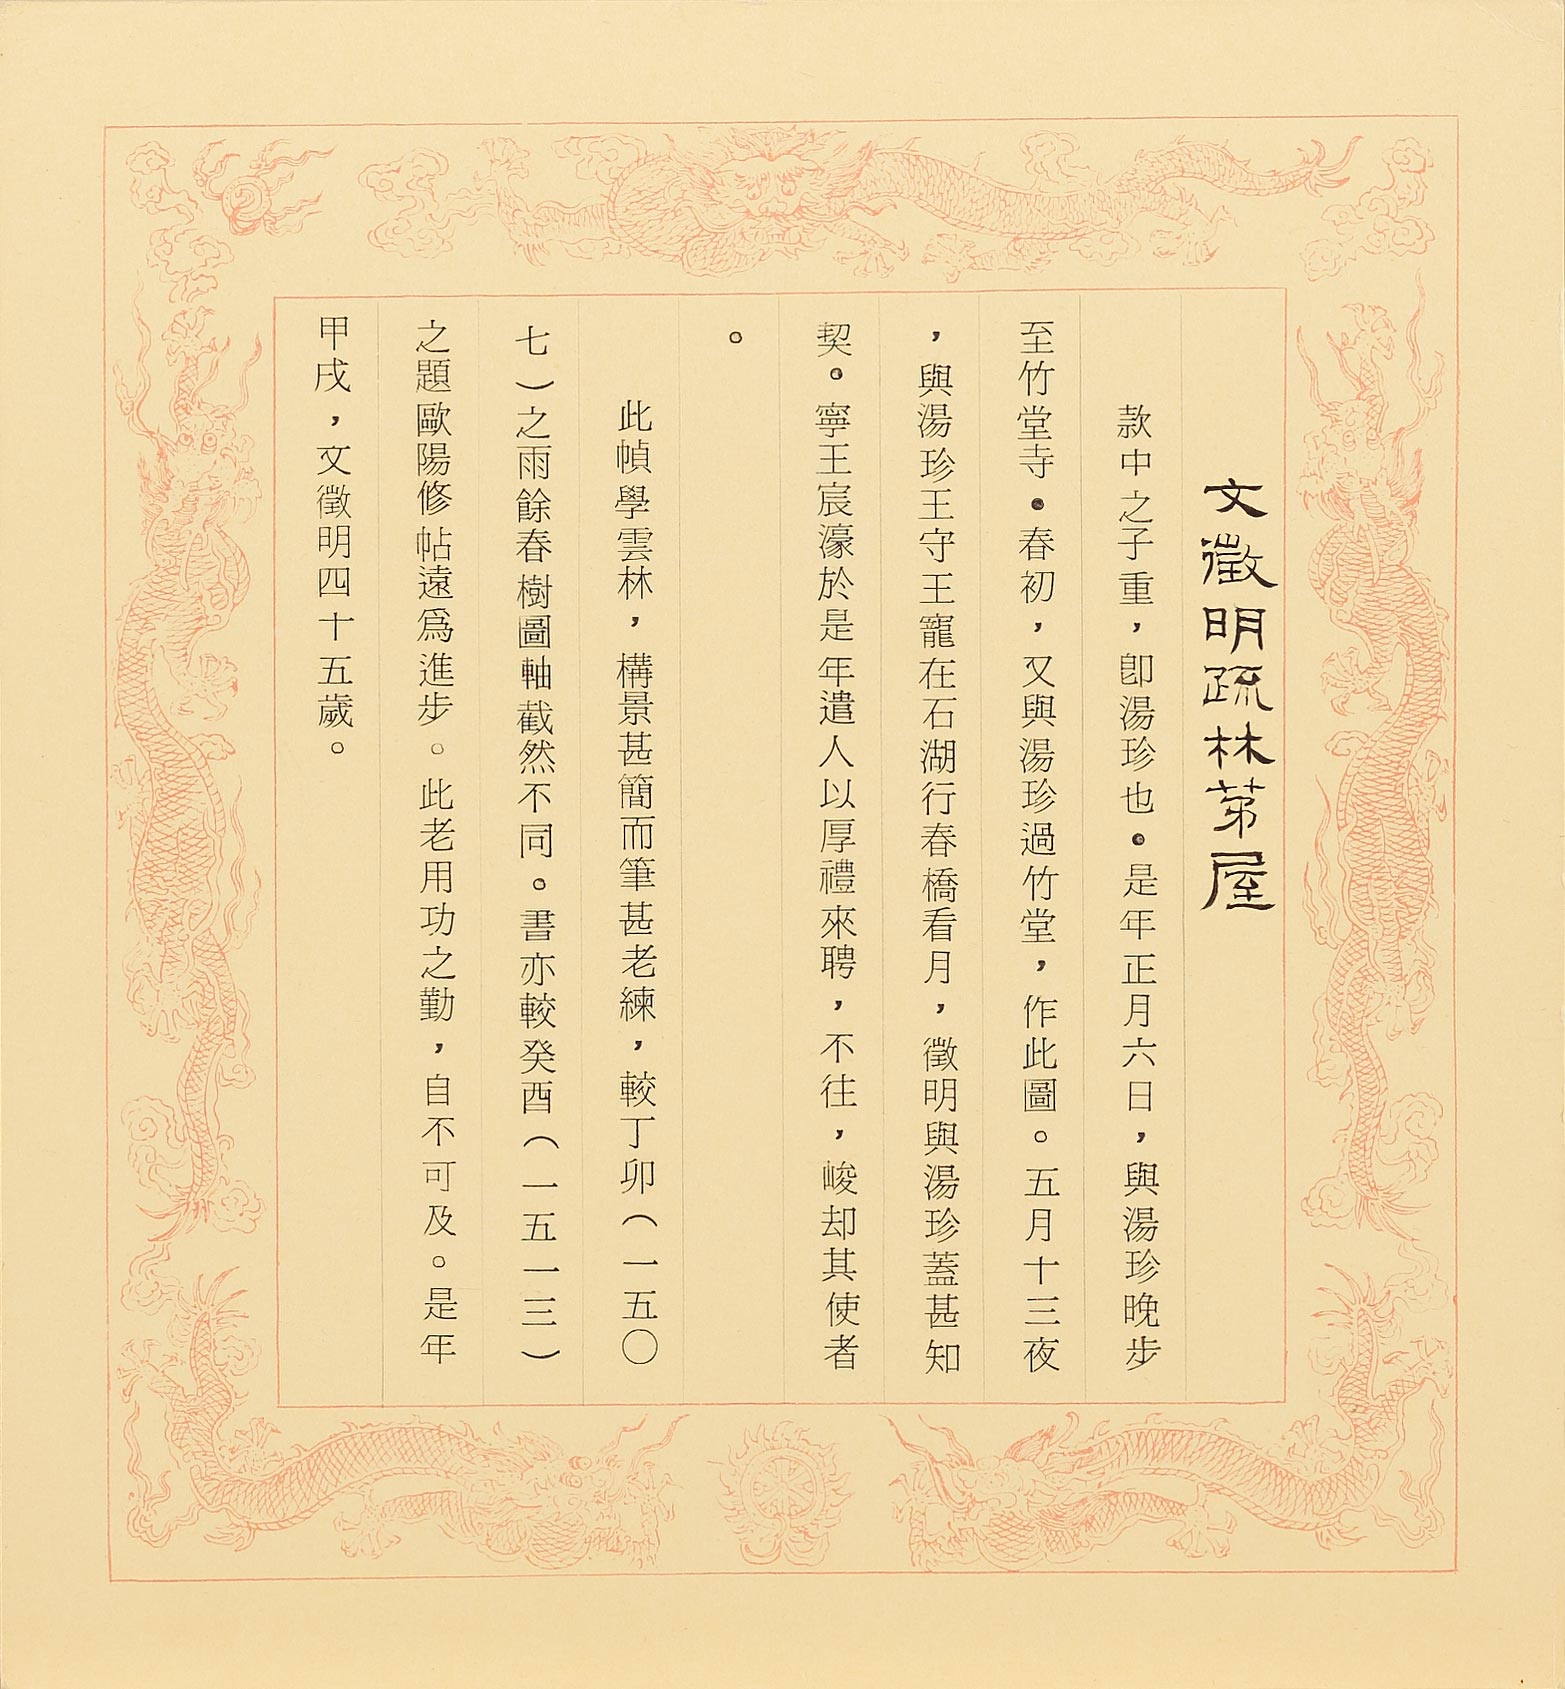 In the early to mid-1990s, the titles of works on dragon-border cards were still done in brush and ink. The title of this card was calligraphed by Chiang Chao-shen.